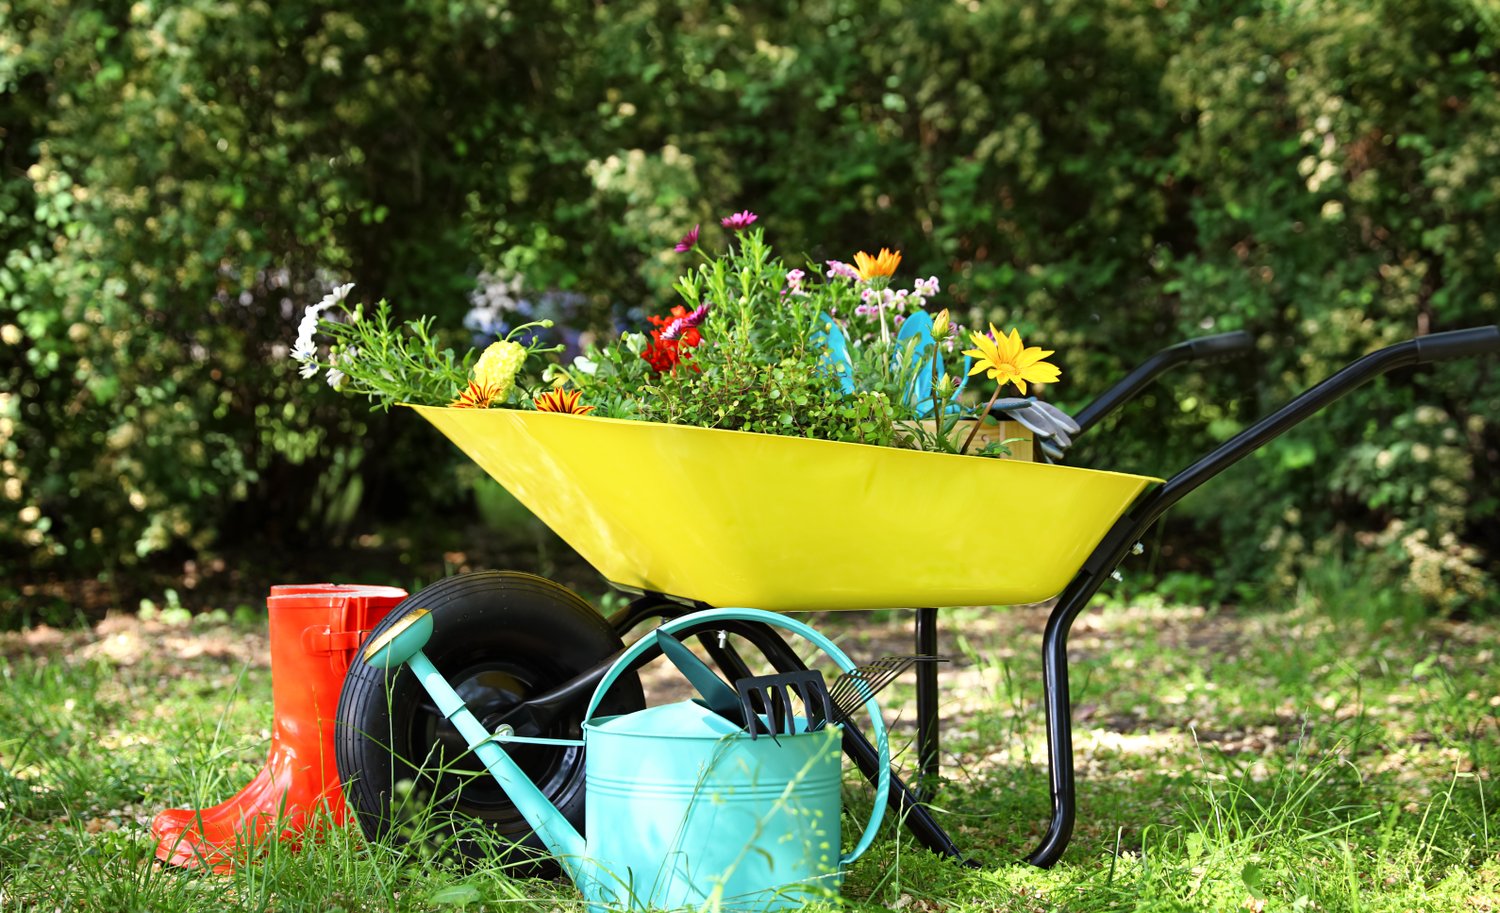 Photo of wheelbarrow with gardening tools and flowers on grass outside